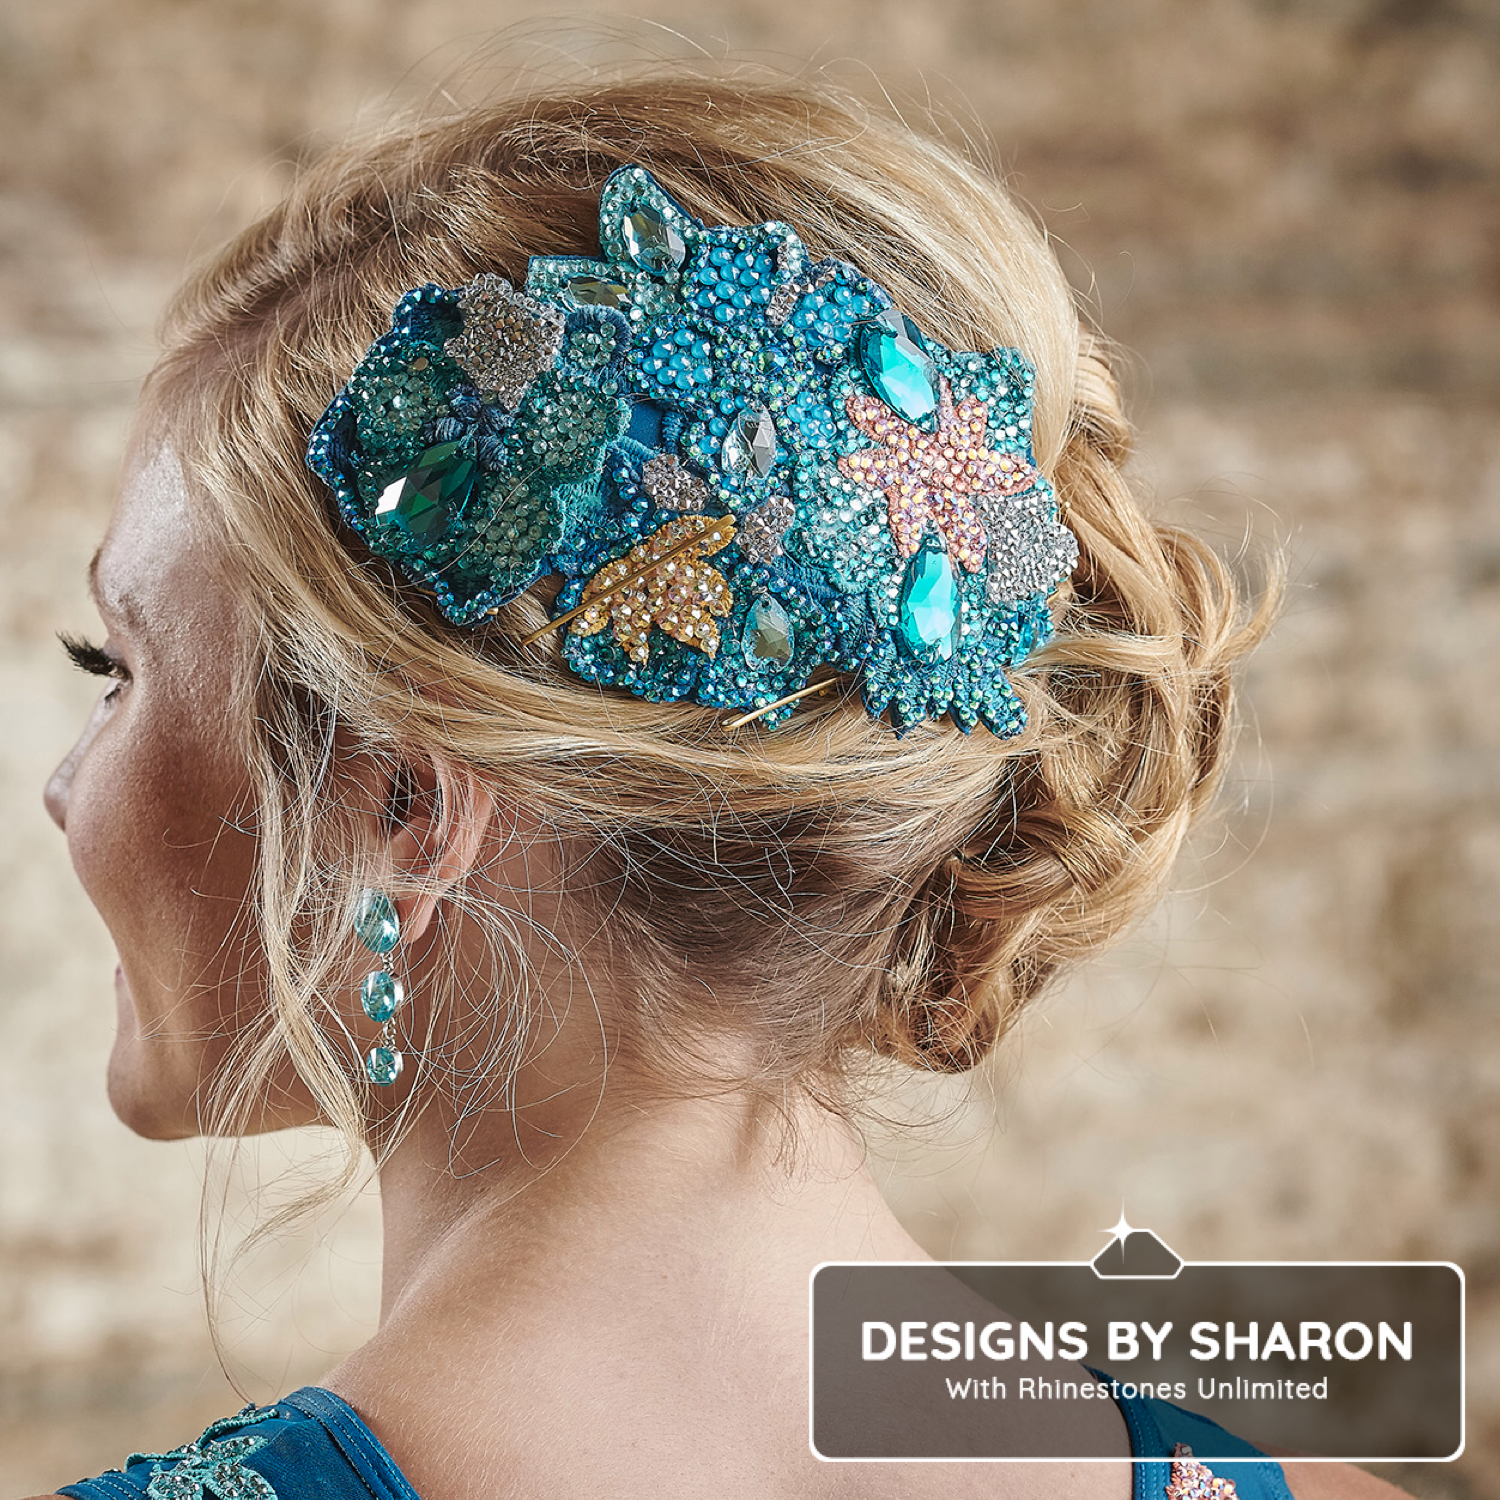 Designs by Sharon with Rhinestones Unlimited